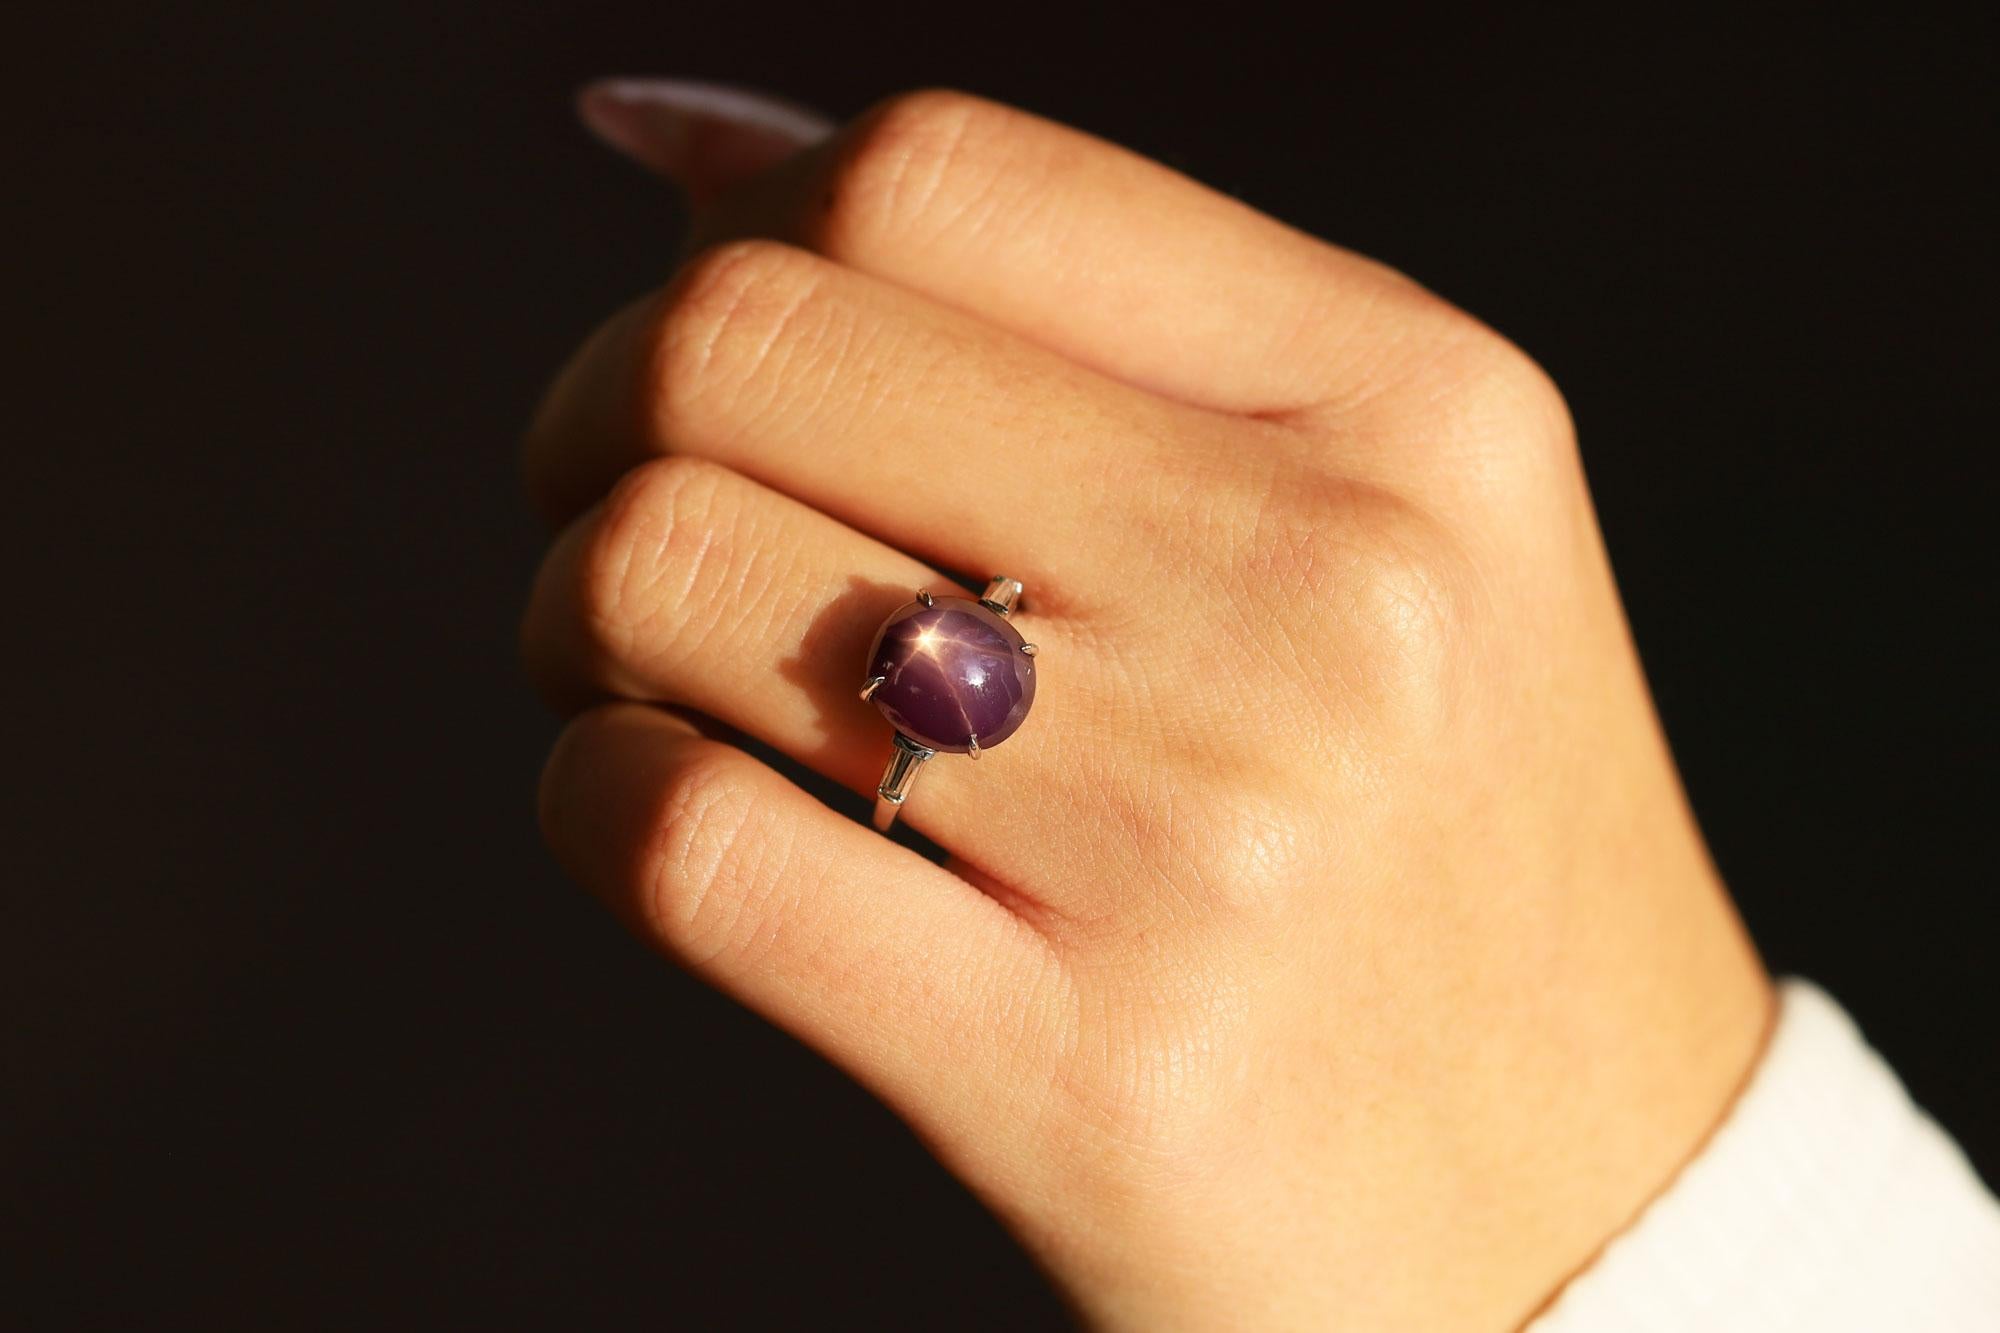 A glorious 1920s Art Deco star sapphire cocktail ring. Centered by a 7.59 carat vivid purple sapphire with a prominent six ray star. This heirloom from a Beverly Hills estate jewelry collection would make for an amazing non-traditional engagement